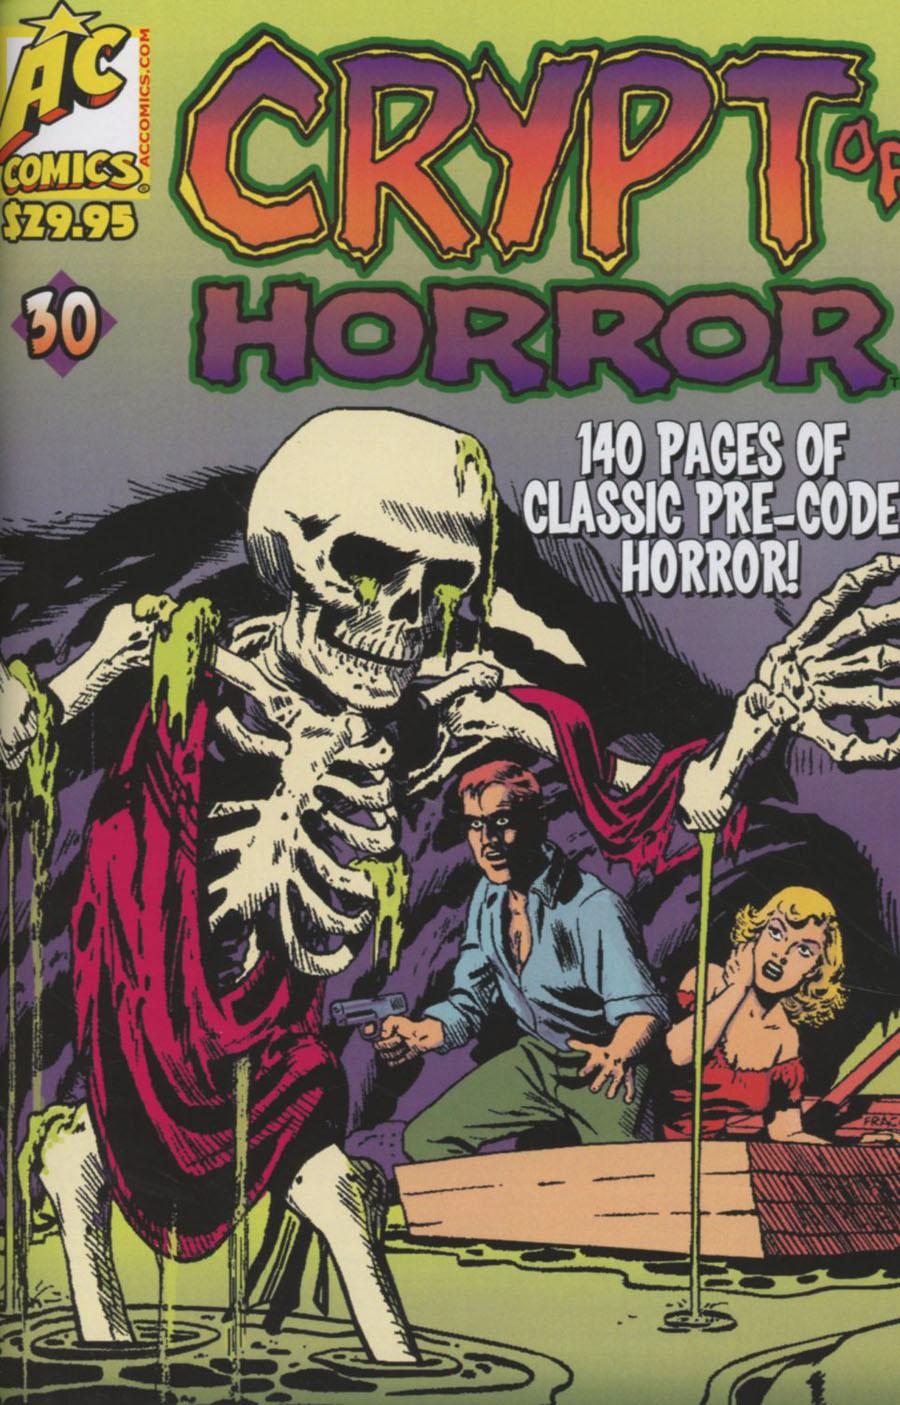 Crypt Of Horror Vol. 1 #30